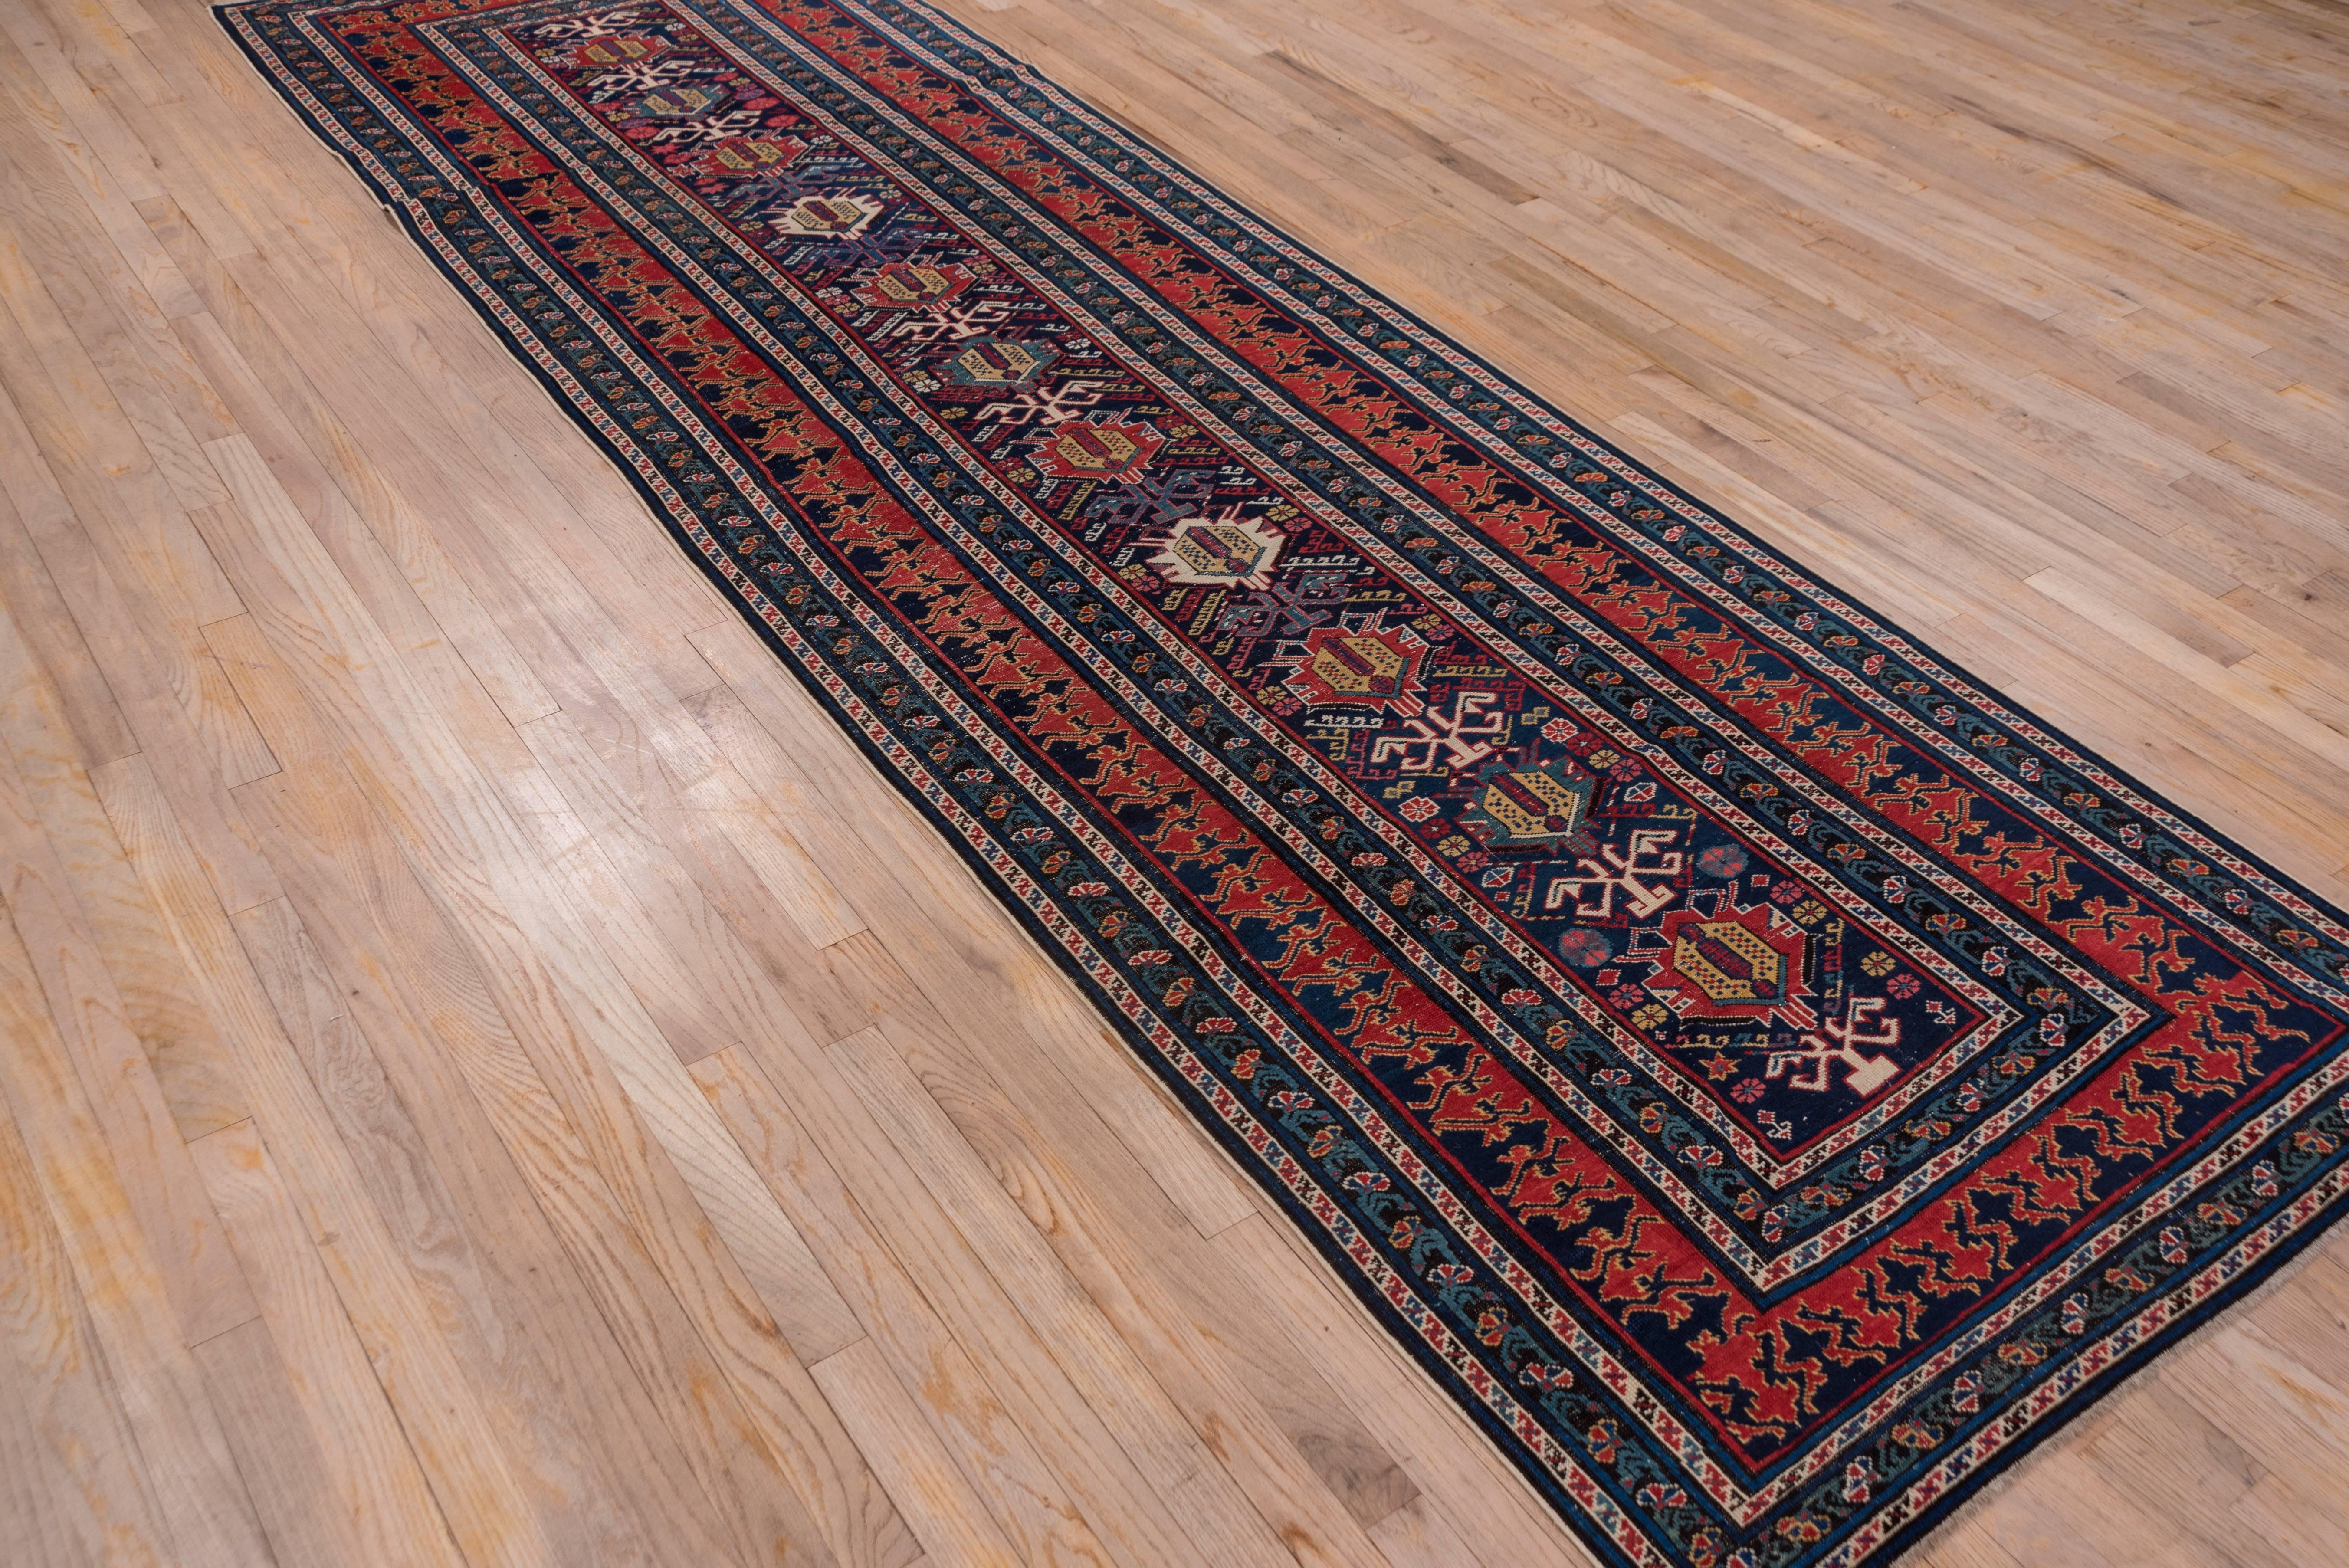 This finely woven east Caucasian long rug displays a field with a one way palmette pattern in red, ivory, green and yellow. The main border is patterned with a complex two colored reciprocal in red and navy. In addition there are two minor stripes